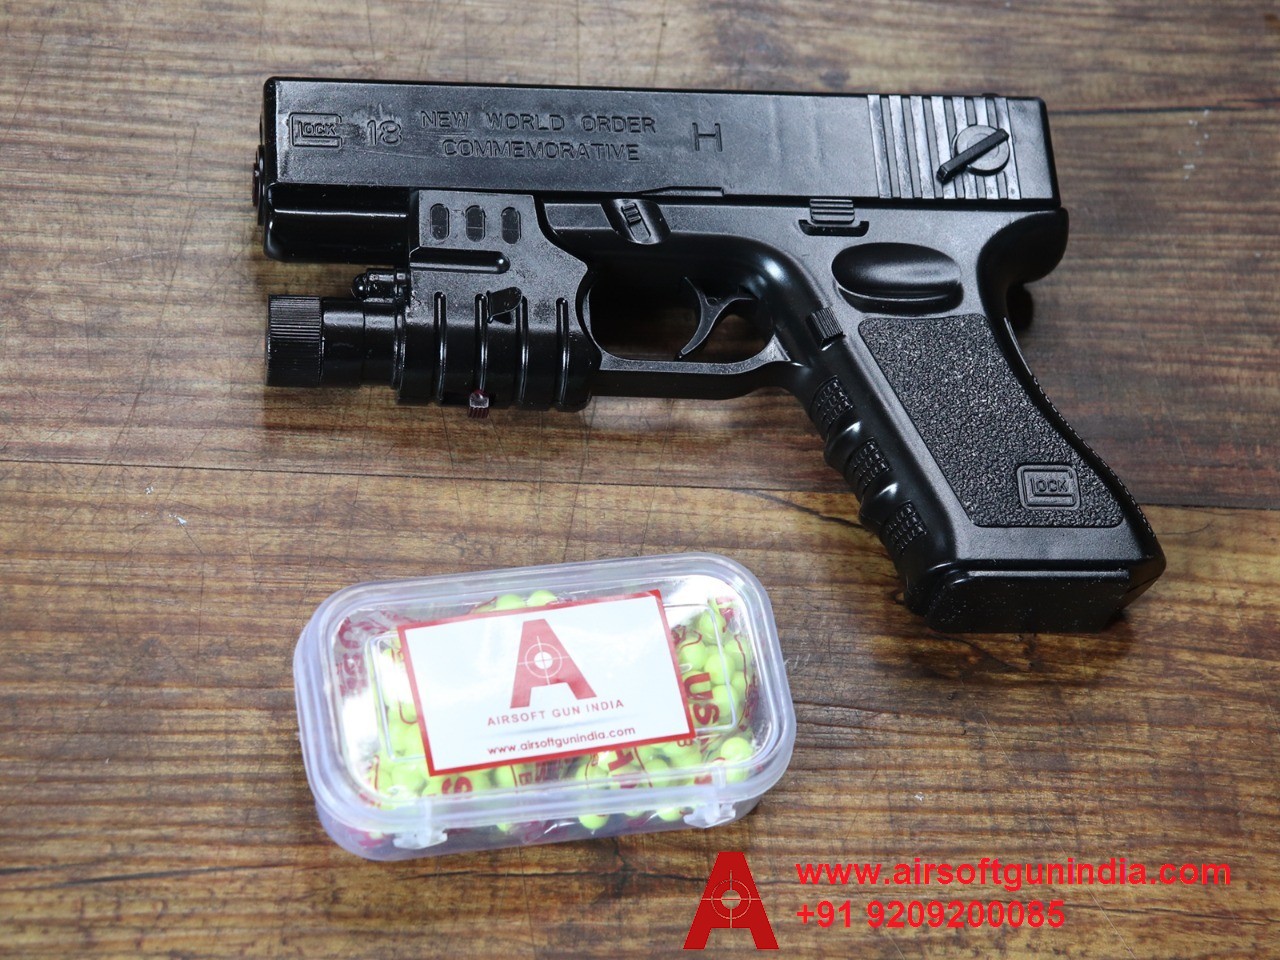 GLOCK 18 SPRING PLASTIC TOY BY AIRSOFT GUN INDIA